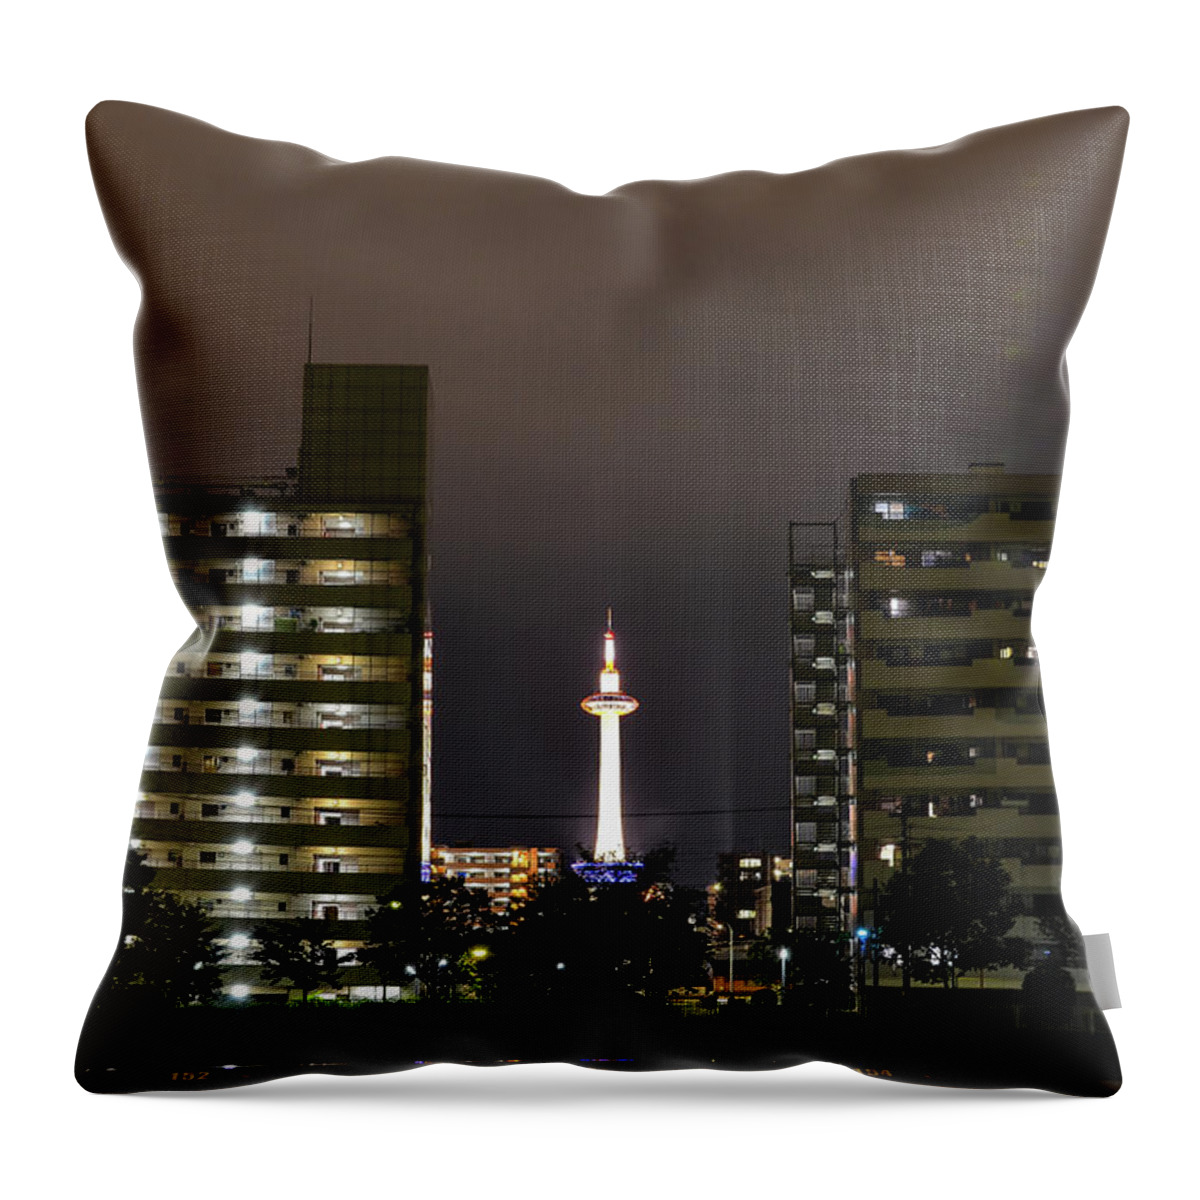 Tranquility Throw Pillow featuring the photograph Kyoto At Night by Image Courtesy Trevor Dobson